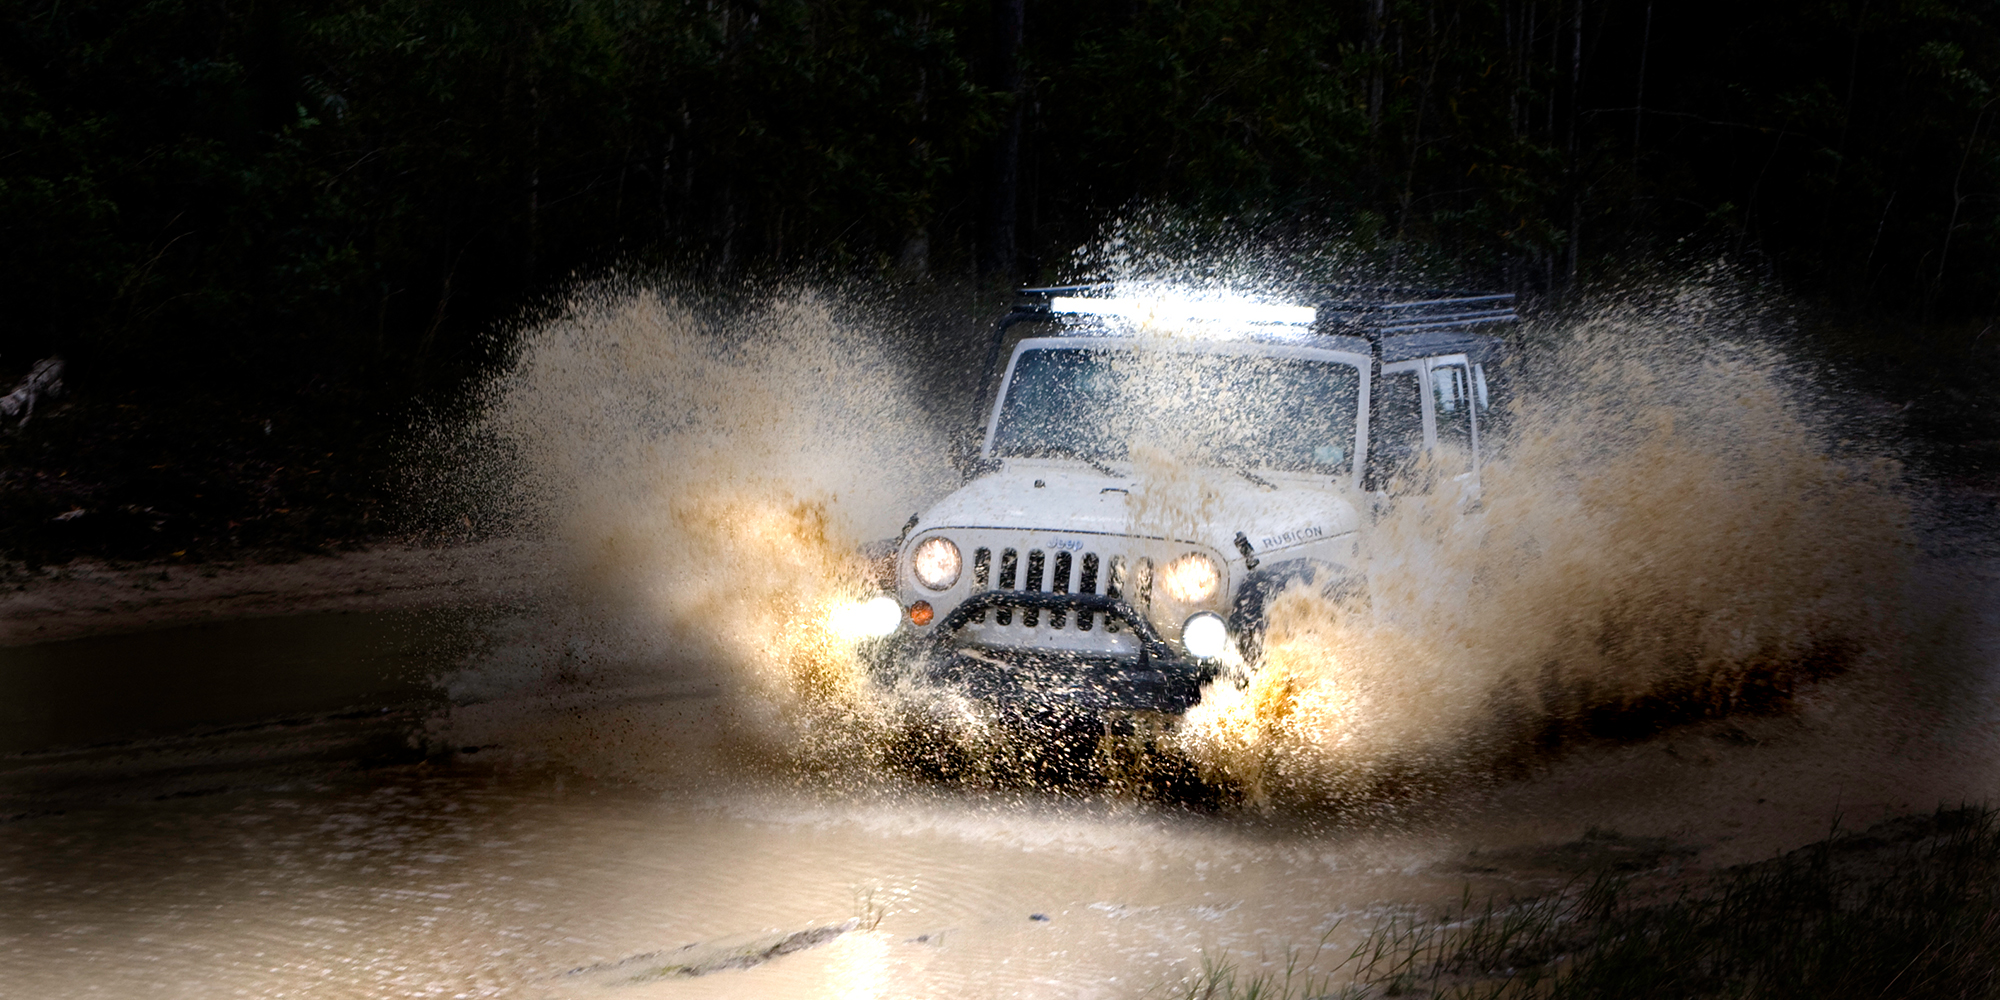 Jeep driving in water